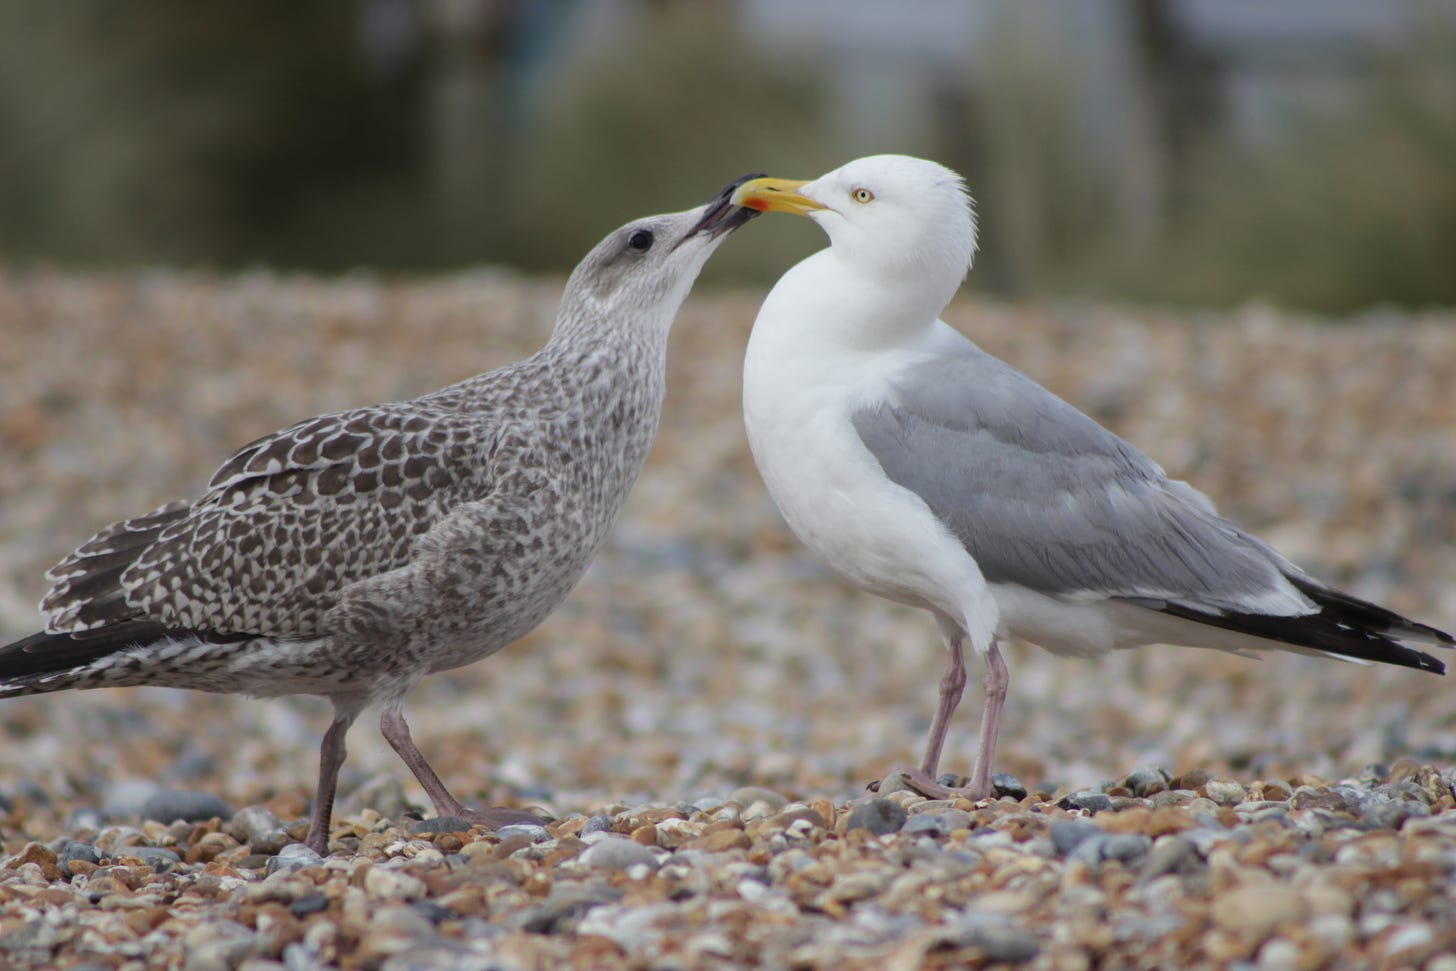 A young herring gull, with brown and white plumage, is hassling its parent, a slightly larger bird with white and grey feathers. The parent does not look amused.